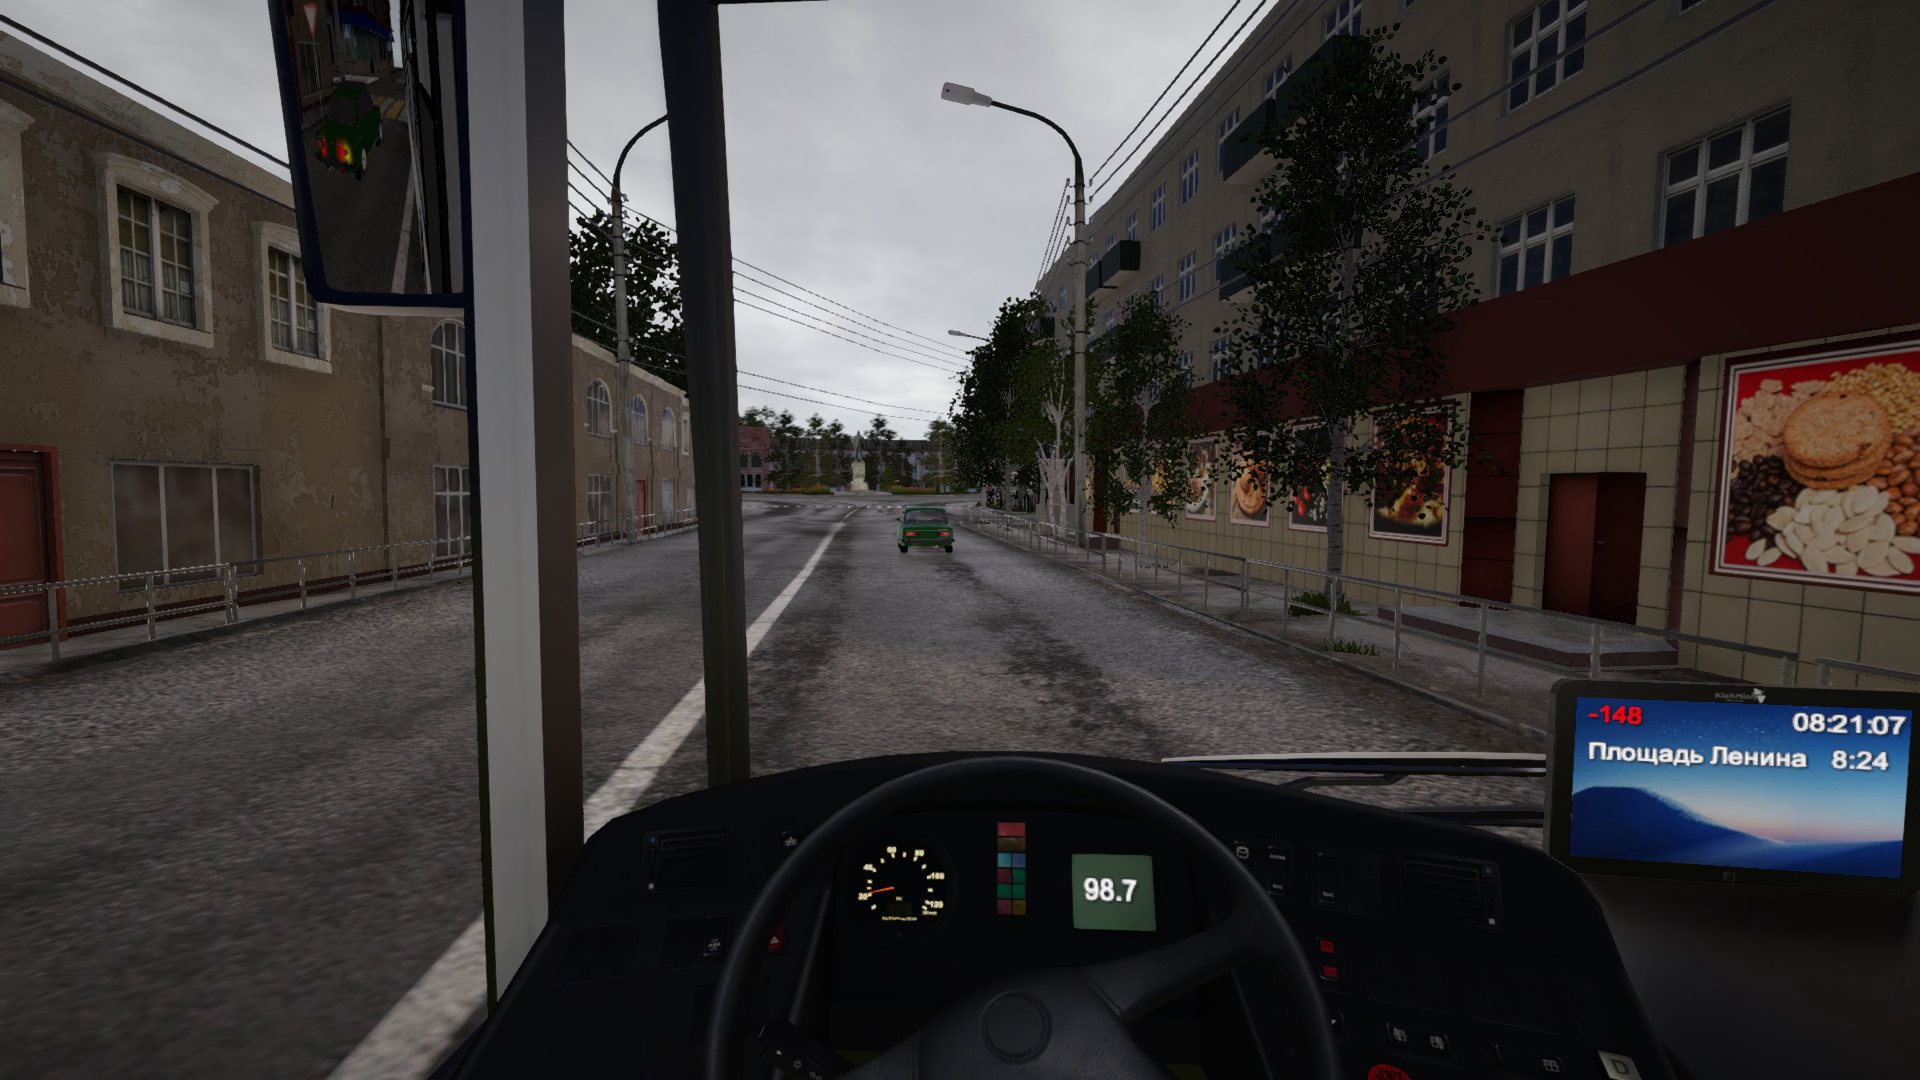 download the new version for apple Bus Driver Simulator 2023